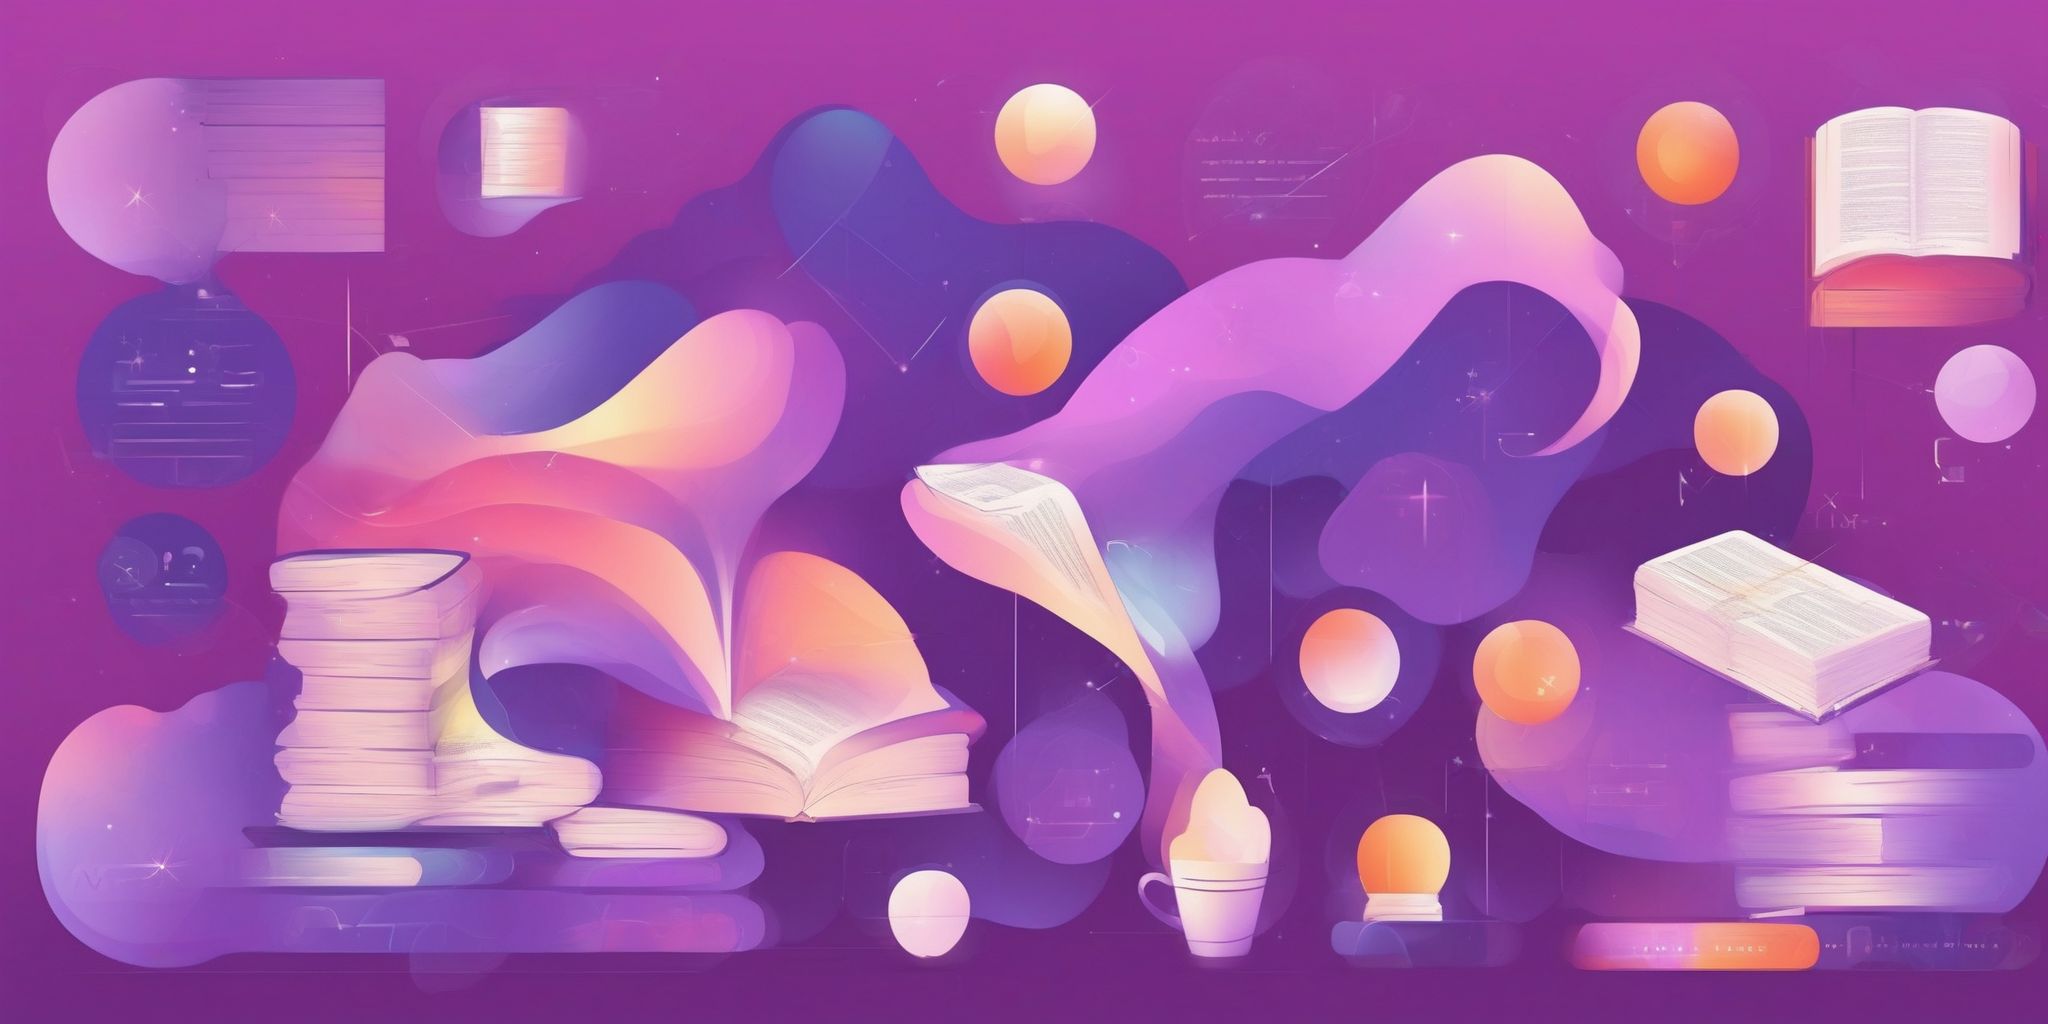 Dictionary in flat illustration style, colorful purple gradient colors